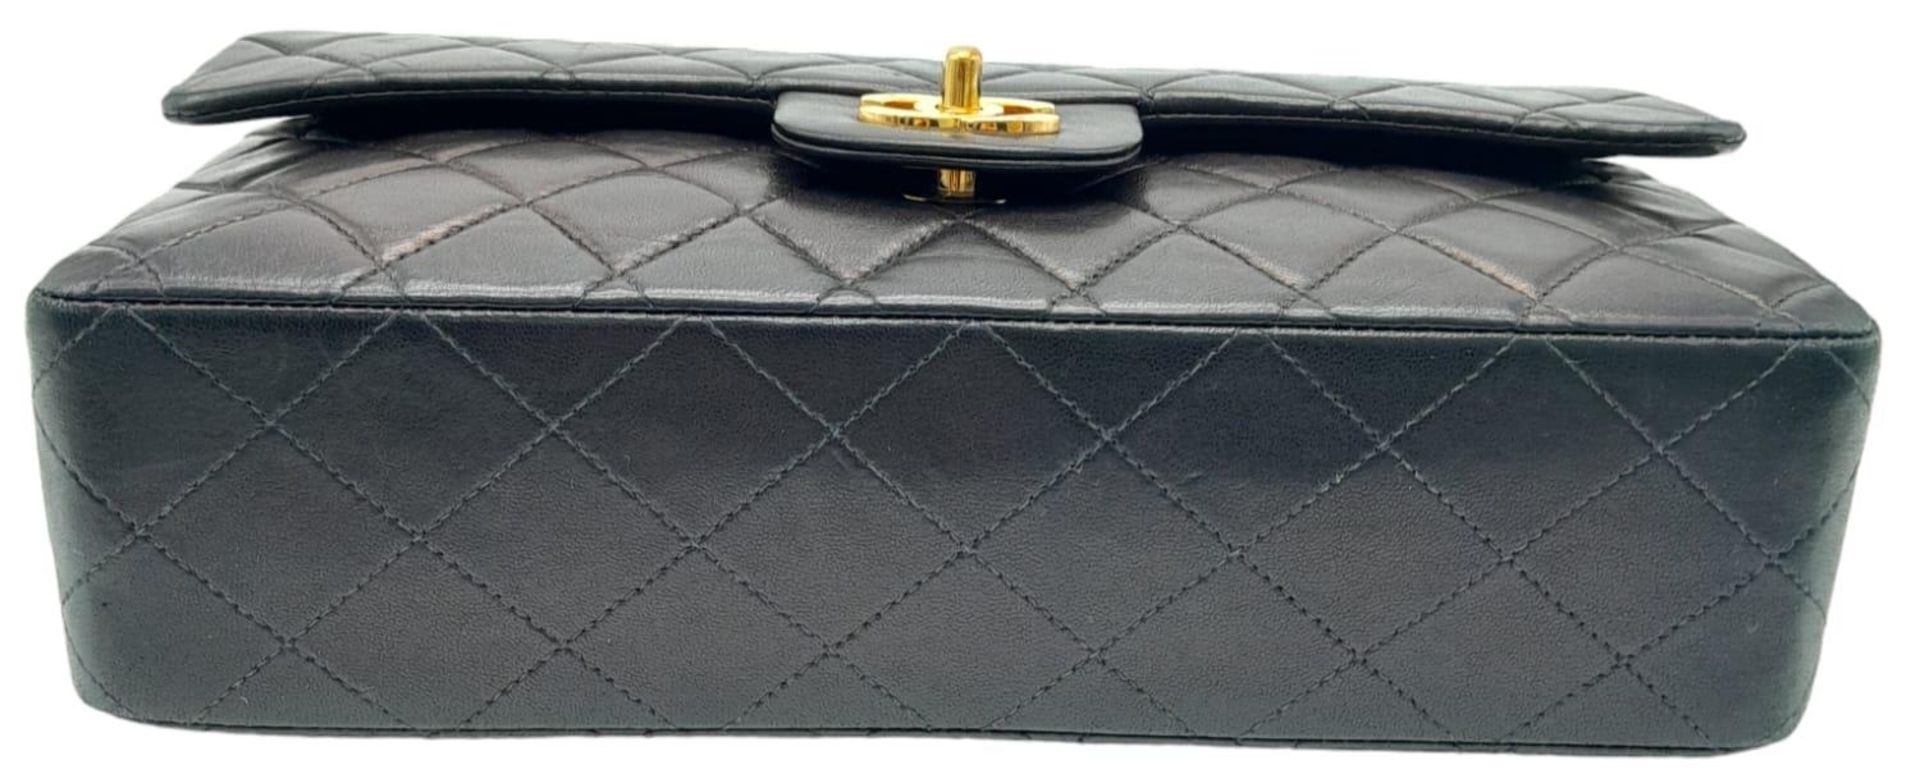 A Chanel Matelasse Chain Shoulder Flap Bag. Black Quilted lamb leather. Gold-tone hardware. CC - Image 5 of 11